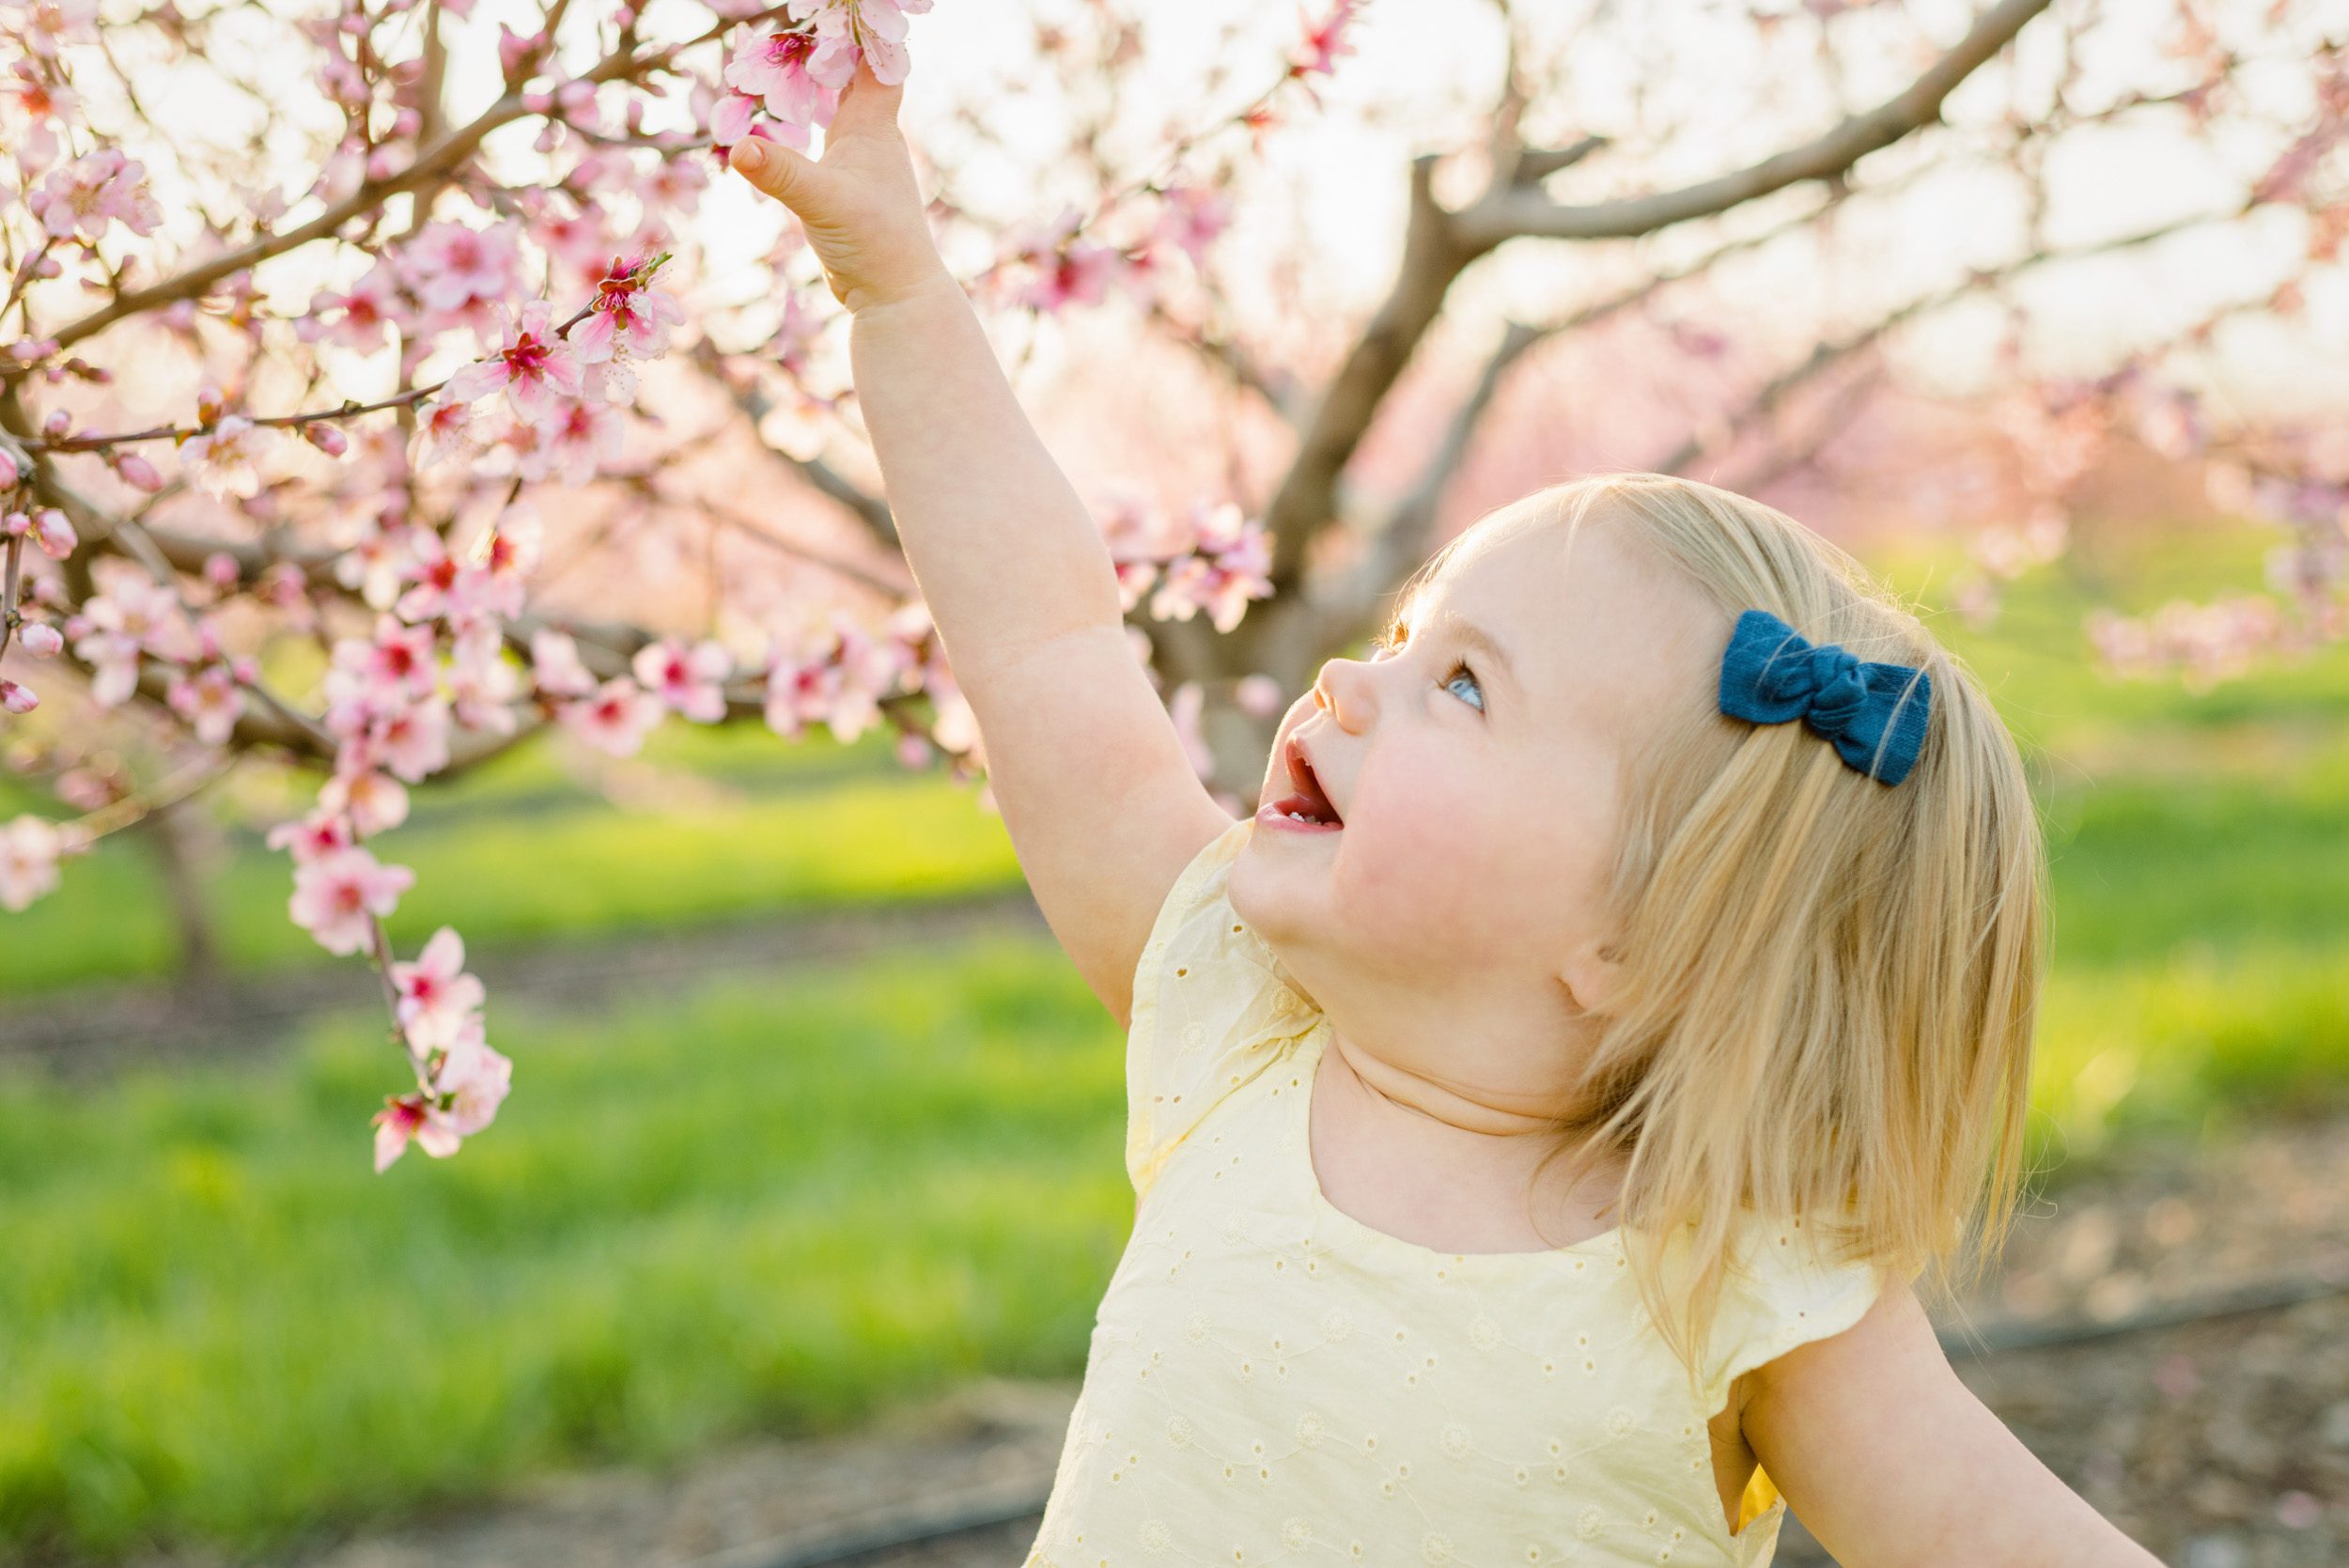 A young girl reaching up to touch a pink flower on a peach tree in an orchard during a family photo session